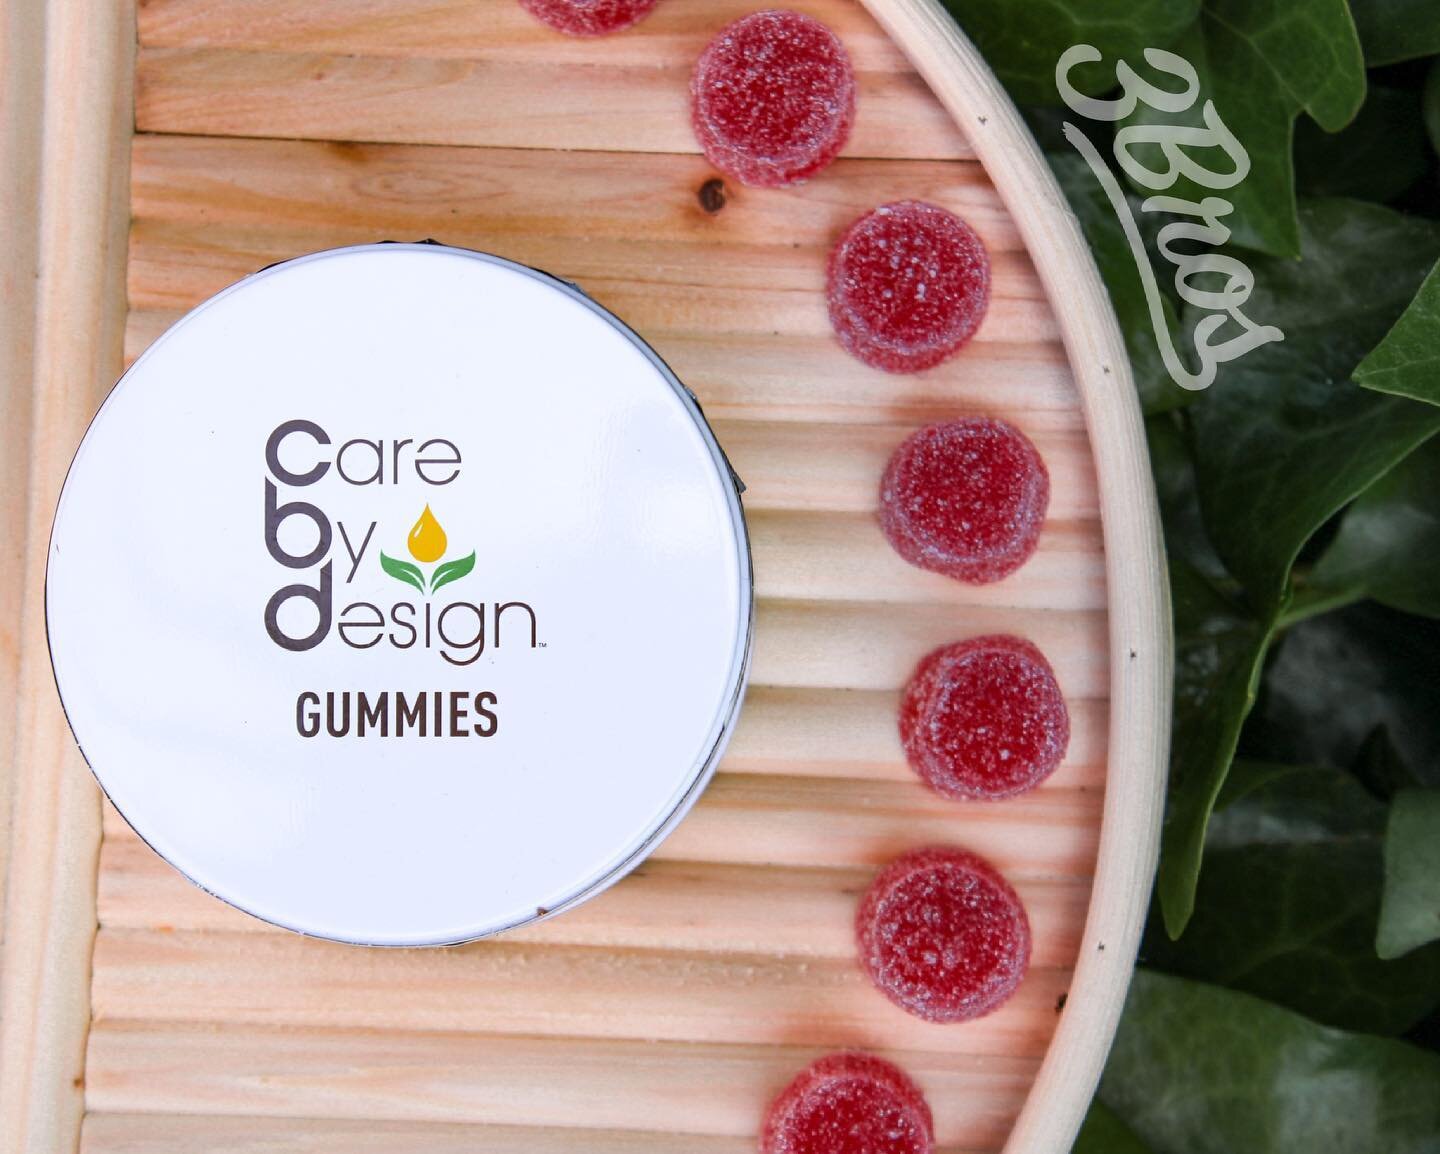 We&rsquo;ve got an edible for every experience level! Right now we&rsquo;re loving @carebydesign for their precisely and consistently dosed gummies in a wide range of ratios, from 1:1 all the way up to 18:1 🍬 
.
.
.

#cannabis #calikush #cannabisdis